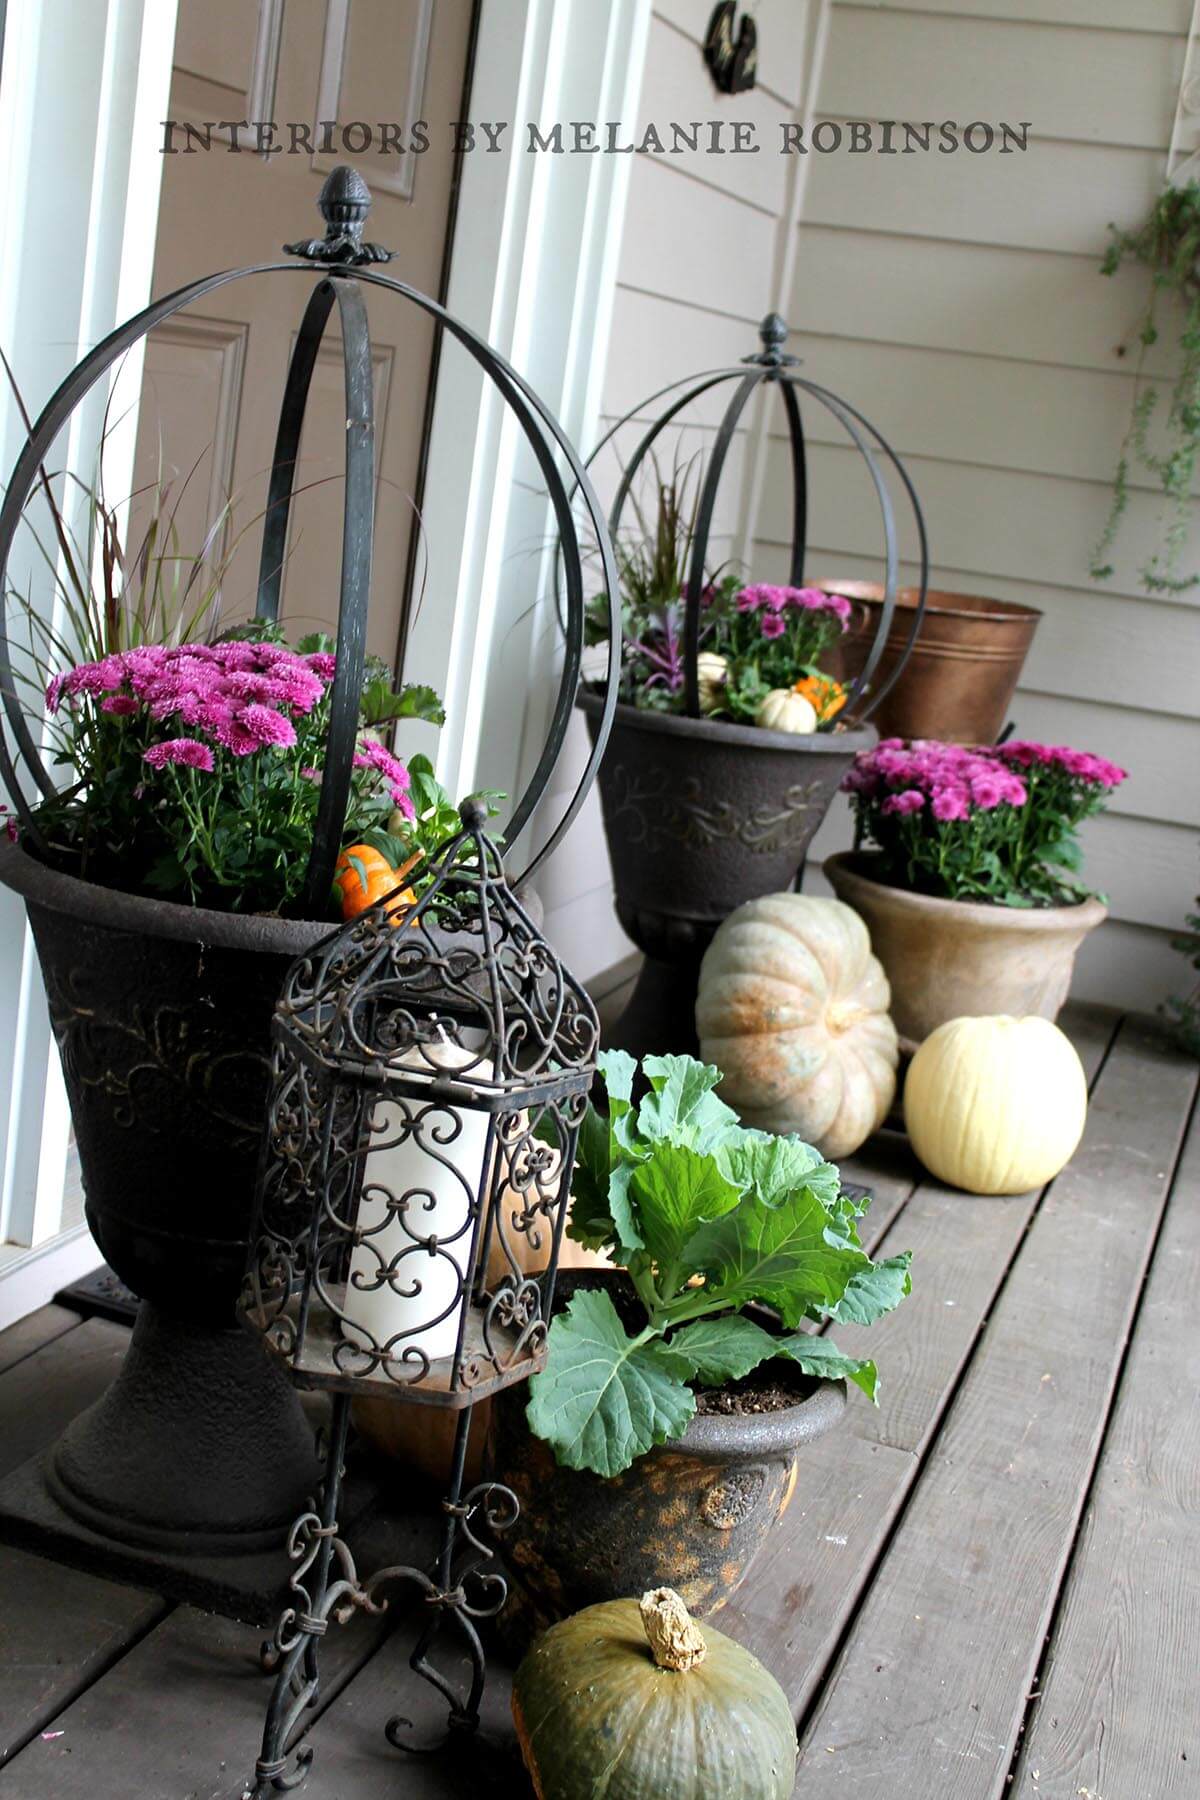 10 Simple Porch Inspirations for Rugged Homes| Porch Decor, Rustic Porch Ideas, Fast Porch Ideas, How to Decorate Your Porch Fast, Rugged Porch Inspirations, Porch and Patio Inspiration, Popular Pin